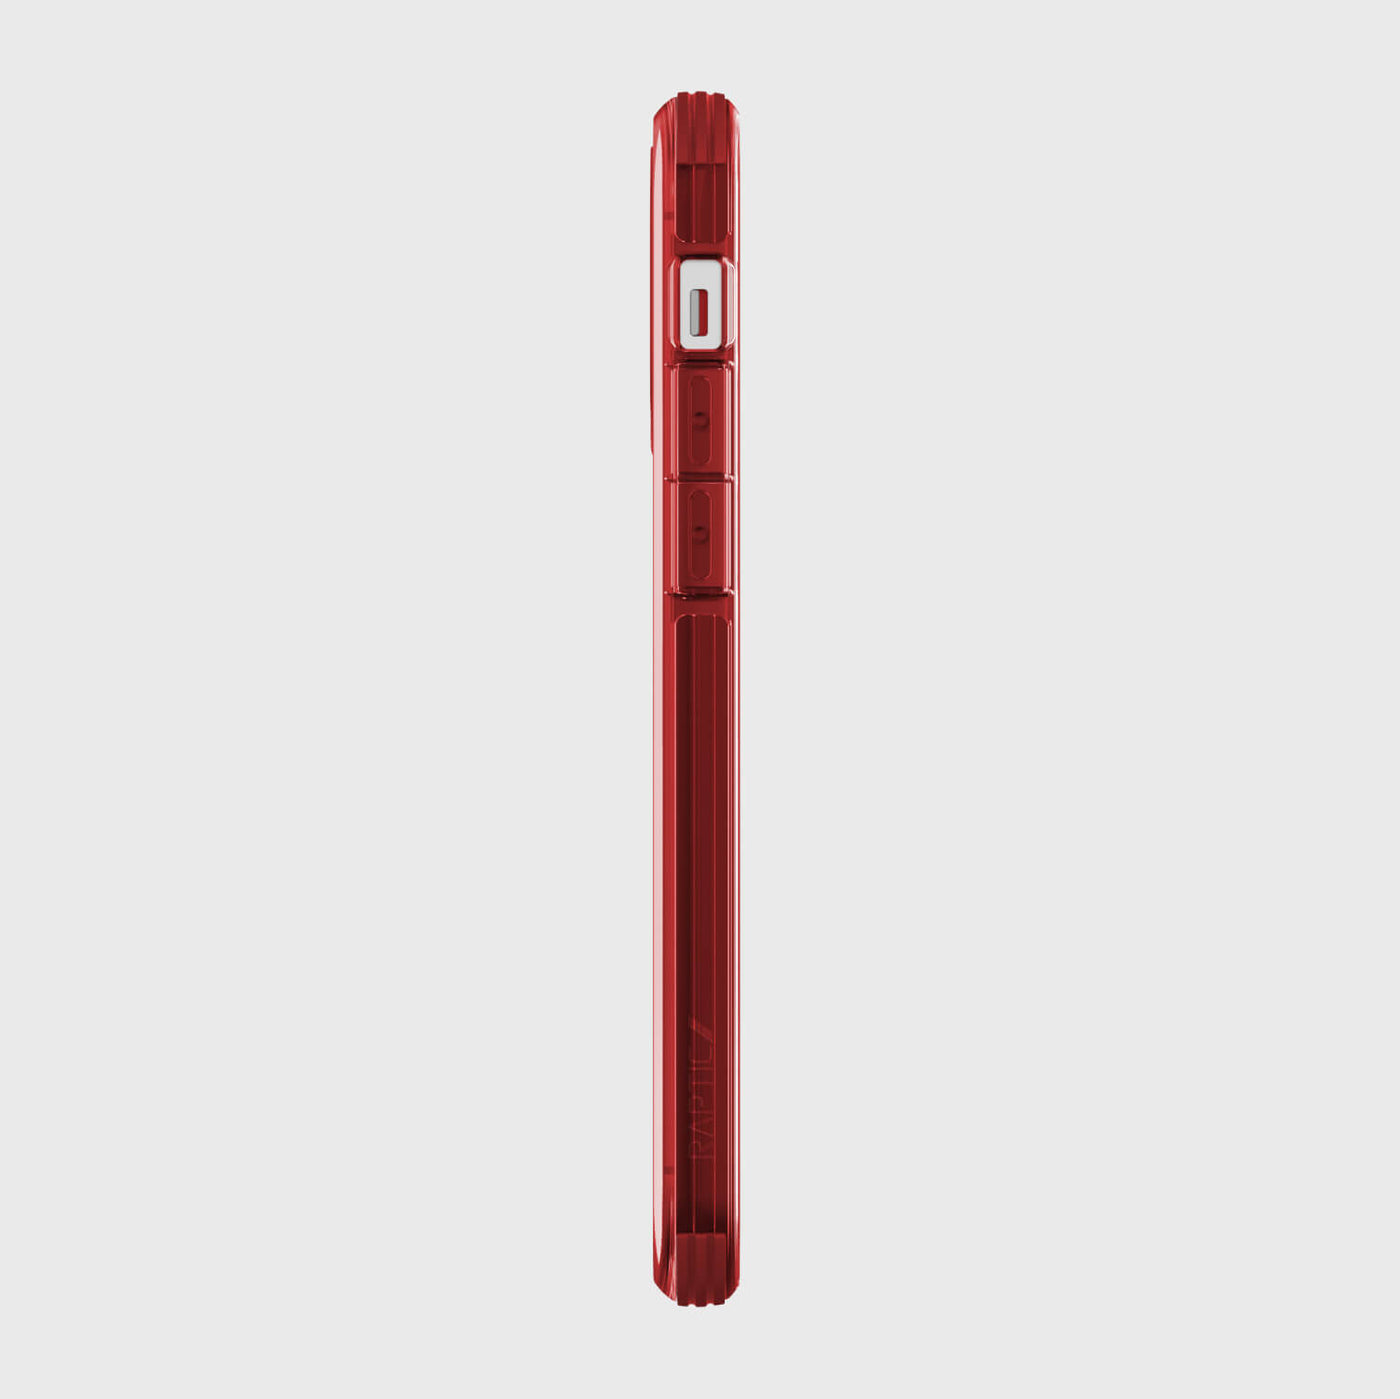 Thin Case for iPhone 12 & iPhone 12 Pro. Raptic Clear in red.#color_red